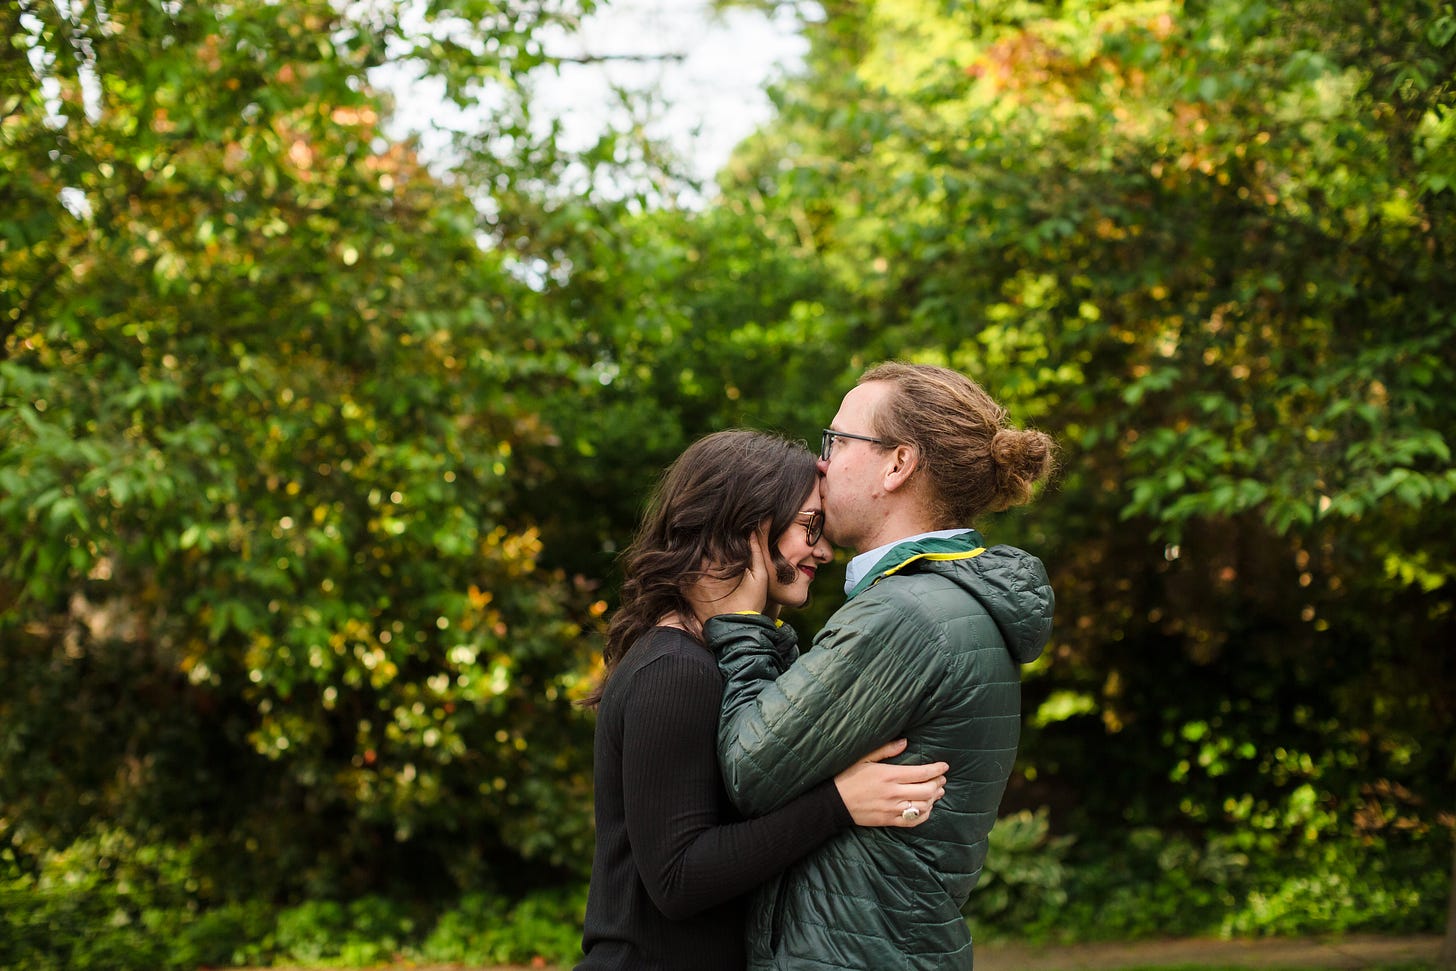 Travis and Kaitlin are standing outside in front of some trees. Their arms are around each other, and Travis is kissing Kaitlin's forehead, and she is smiling.